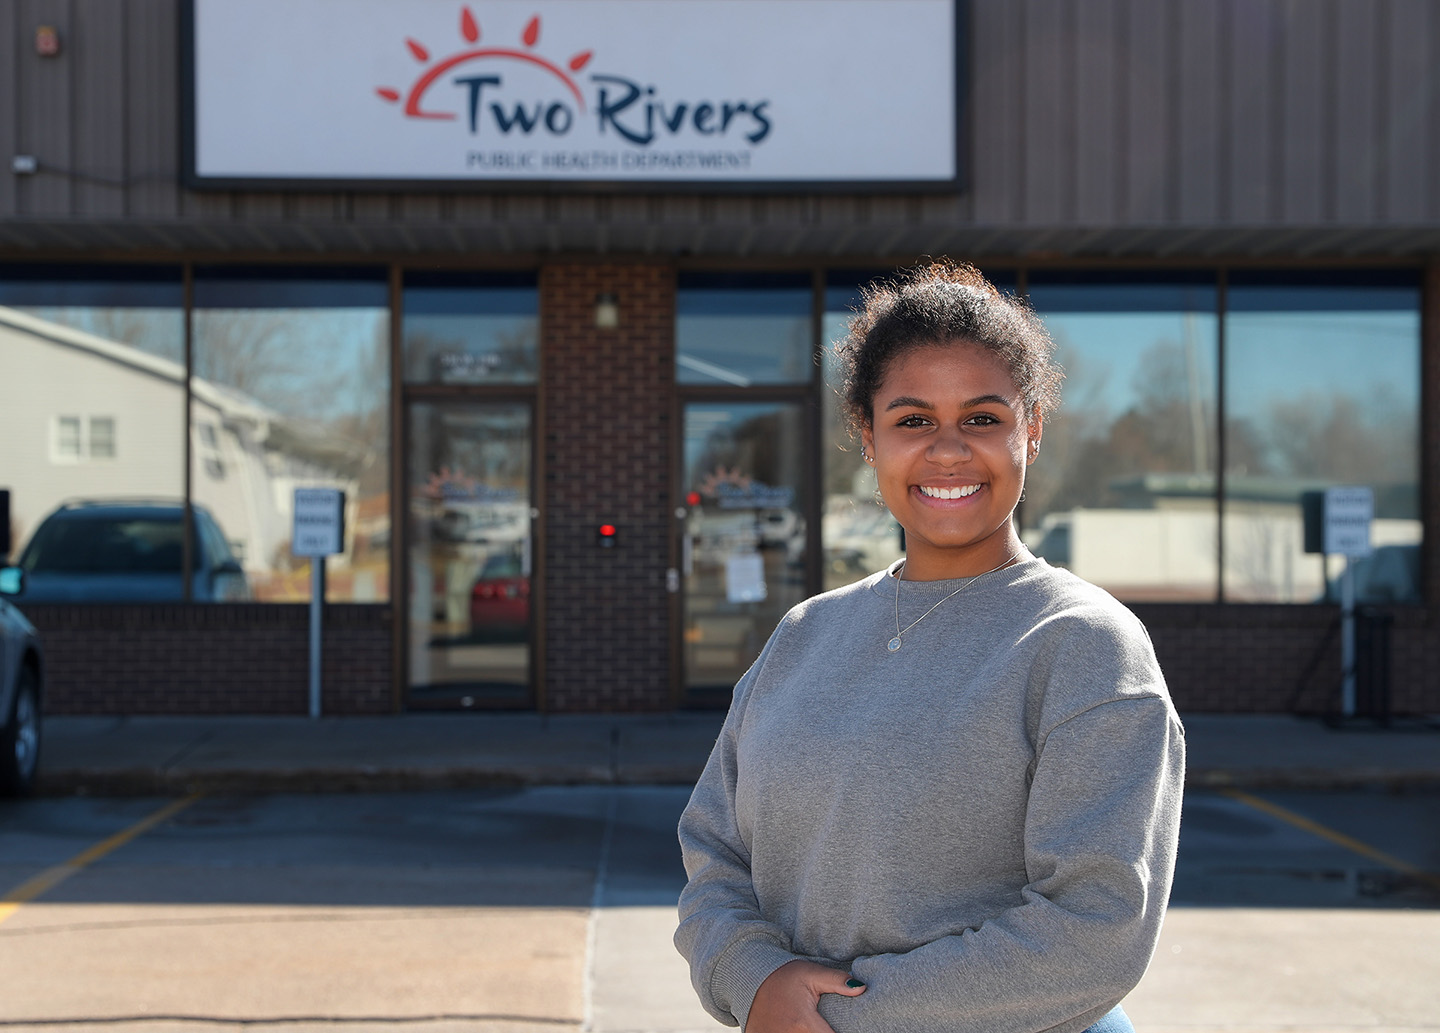 UNK sophomore Crista Manning volunteered at Two Rivers Public Health Department last summer. The experience solidified her decision to study public health and eventually become an epidemiologist. (Photos by Erika Pritchard, UNK Communications)